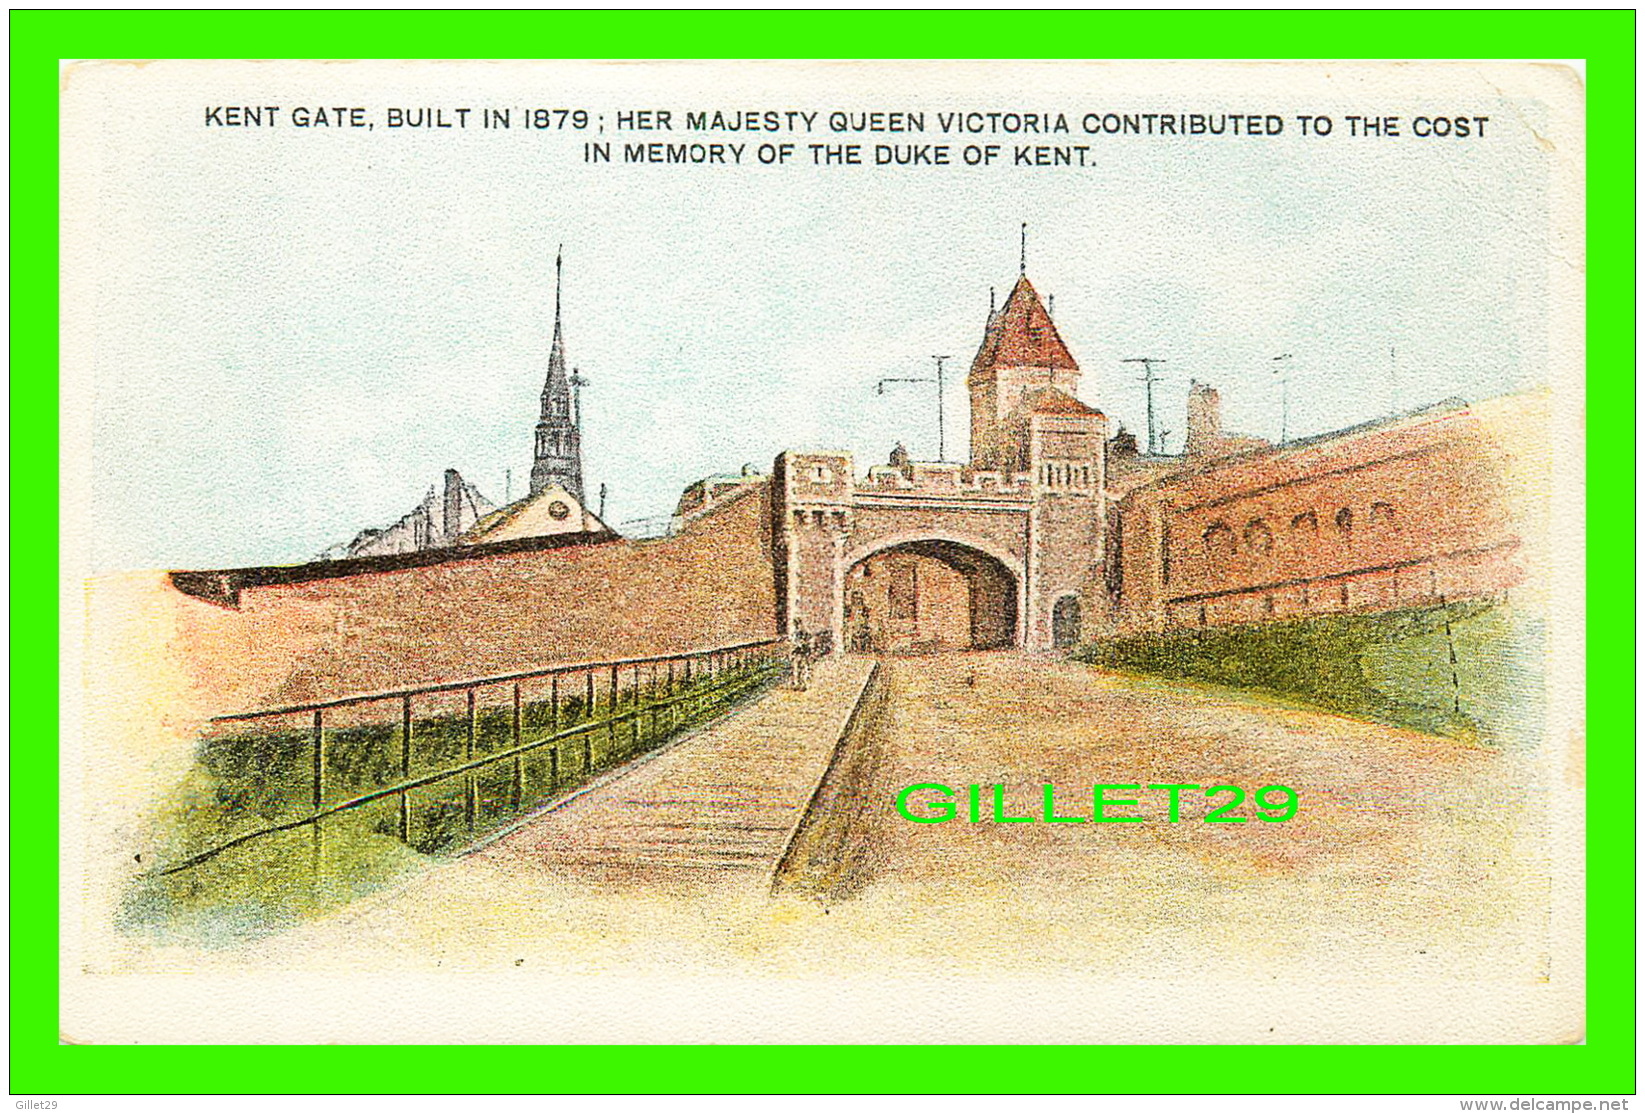 QUÉBEC - KENT GATE, BUILT IN 1879, MAJESTY QUEEN VICTORIA  CONTRIBUTED TO THE COST - ANIMATED - THE MORTIMER CO - - Québec – Les Portes